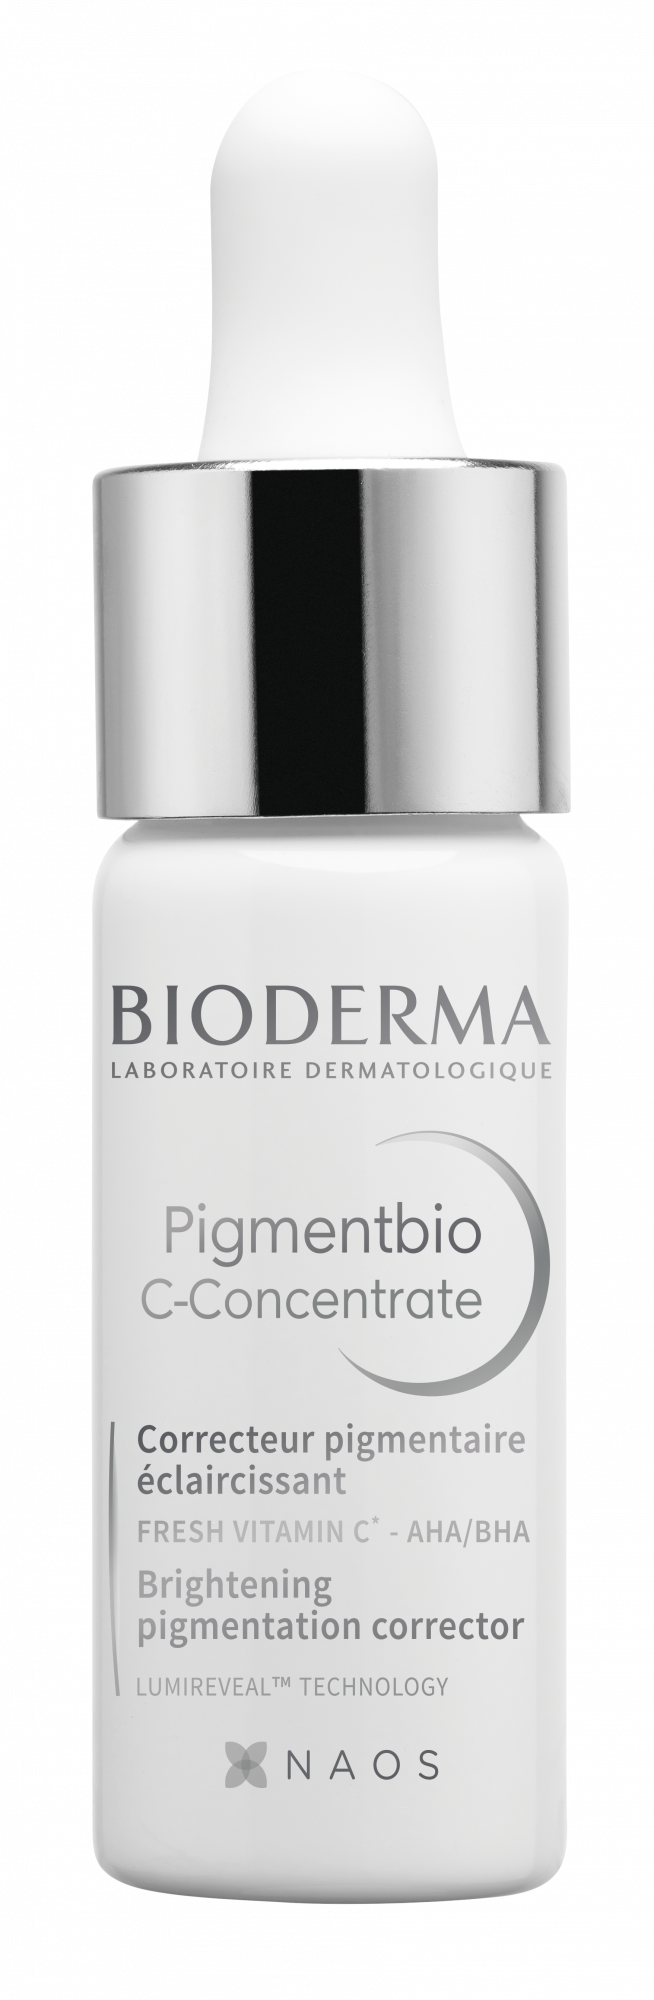 Bioderma Pigmentbio C-Concentrate Review – Beautiful With Brains